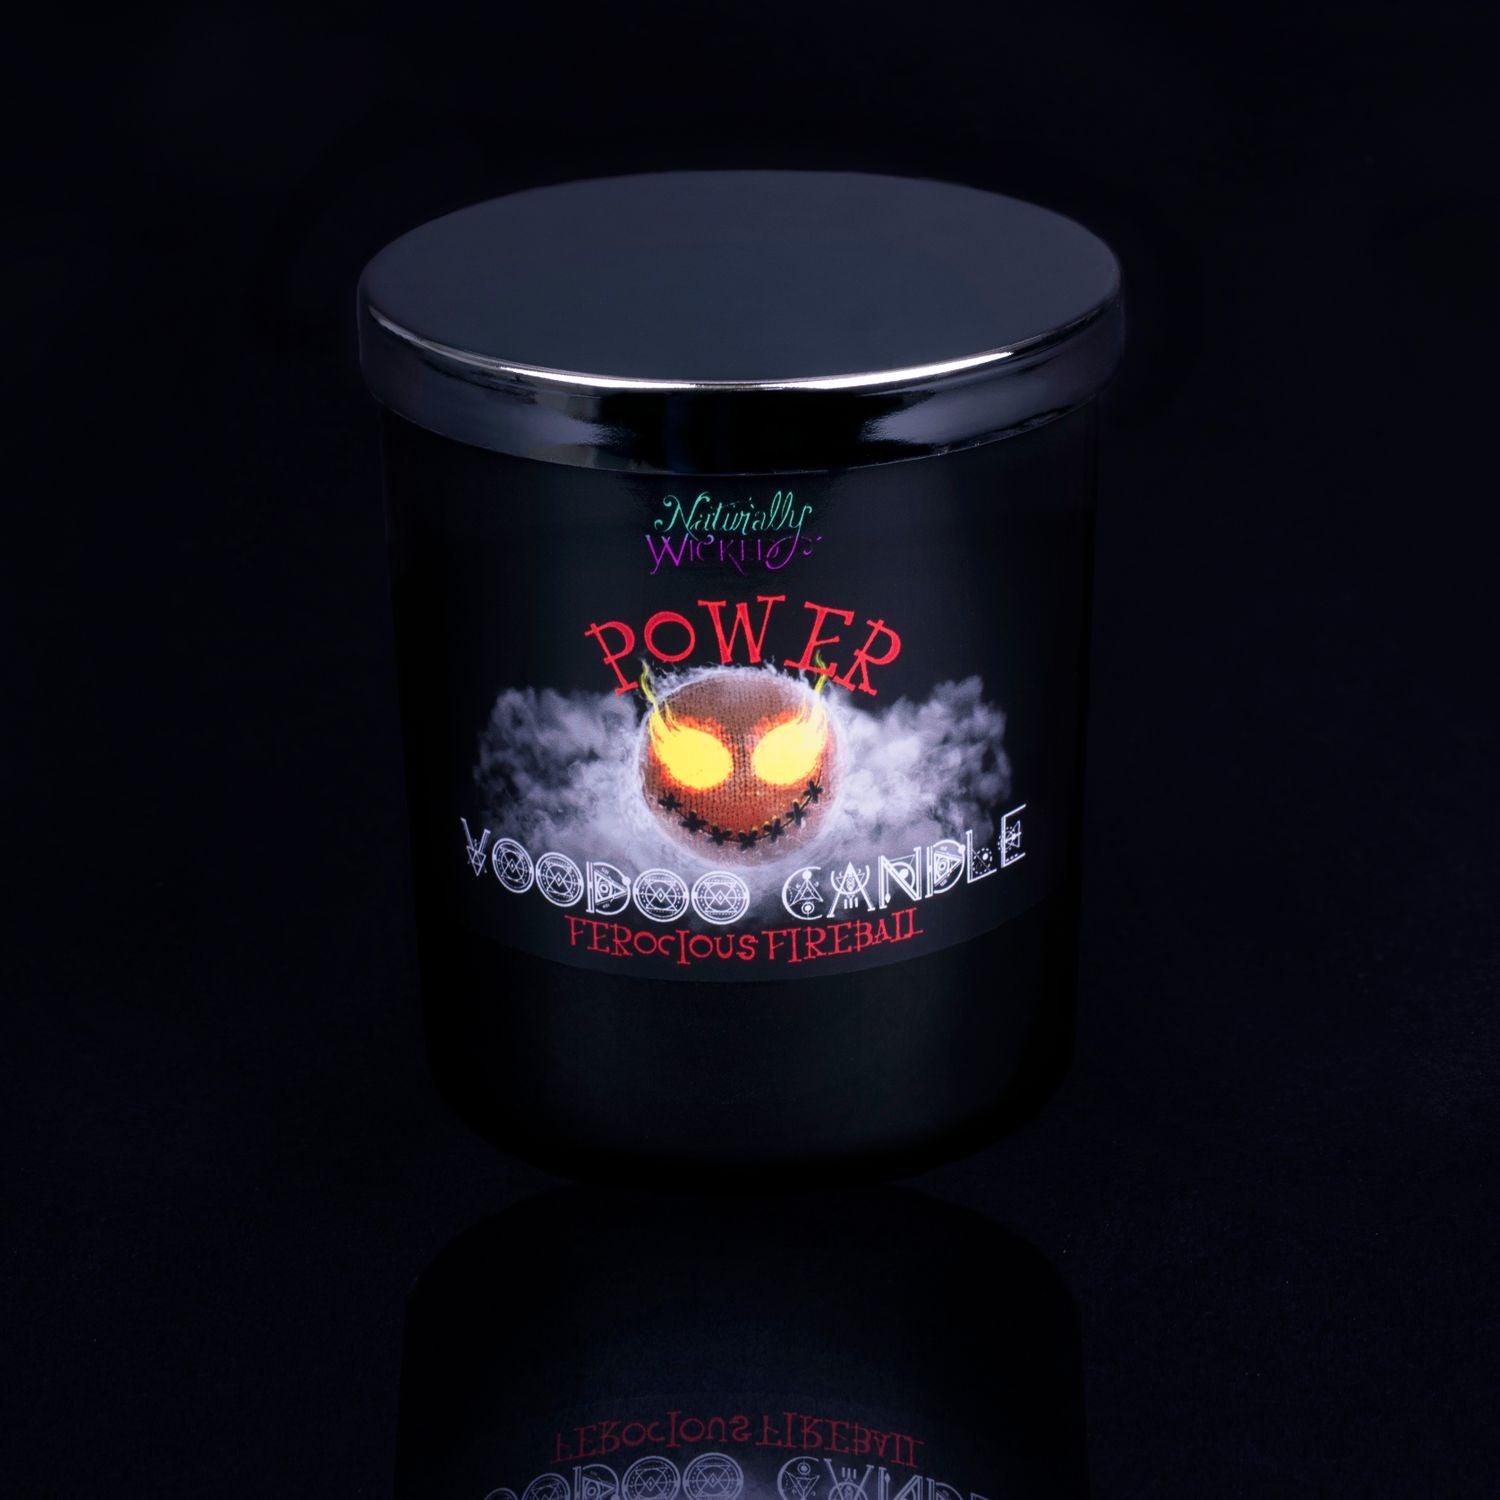 Naturally Wicked Voodoo Power Spell Candle With Mirror Finished Exquisite Lid In Place. Featuring A Black Gloss Label, A Voodoo Doll Design And Ferocious Fireball Scent.